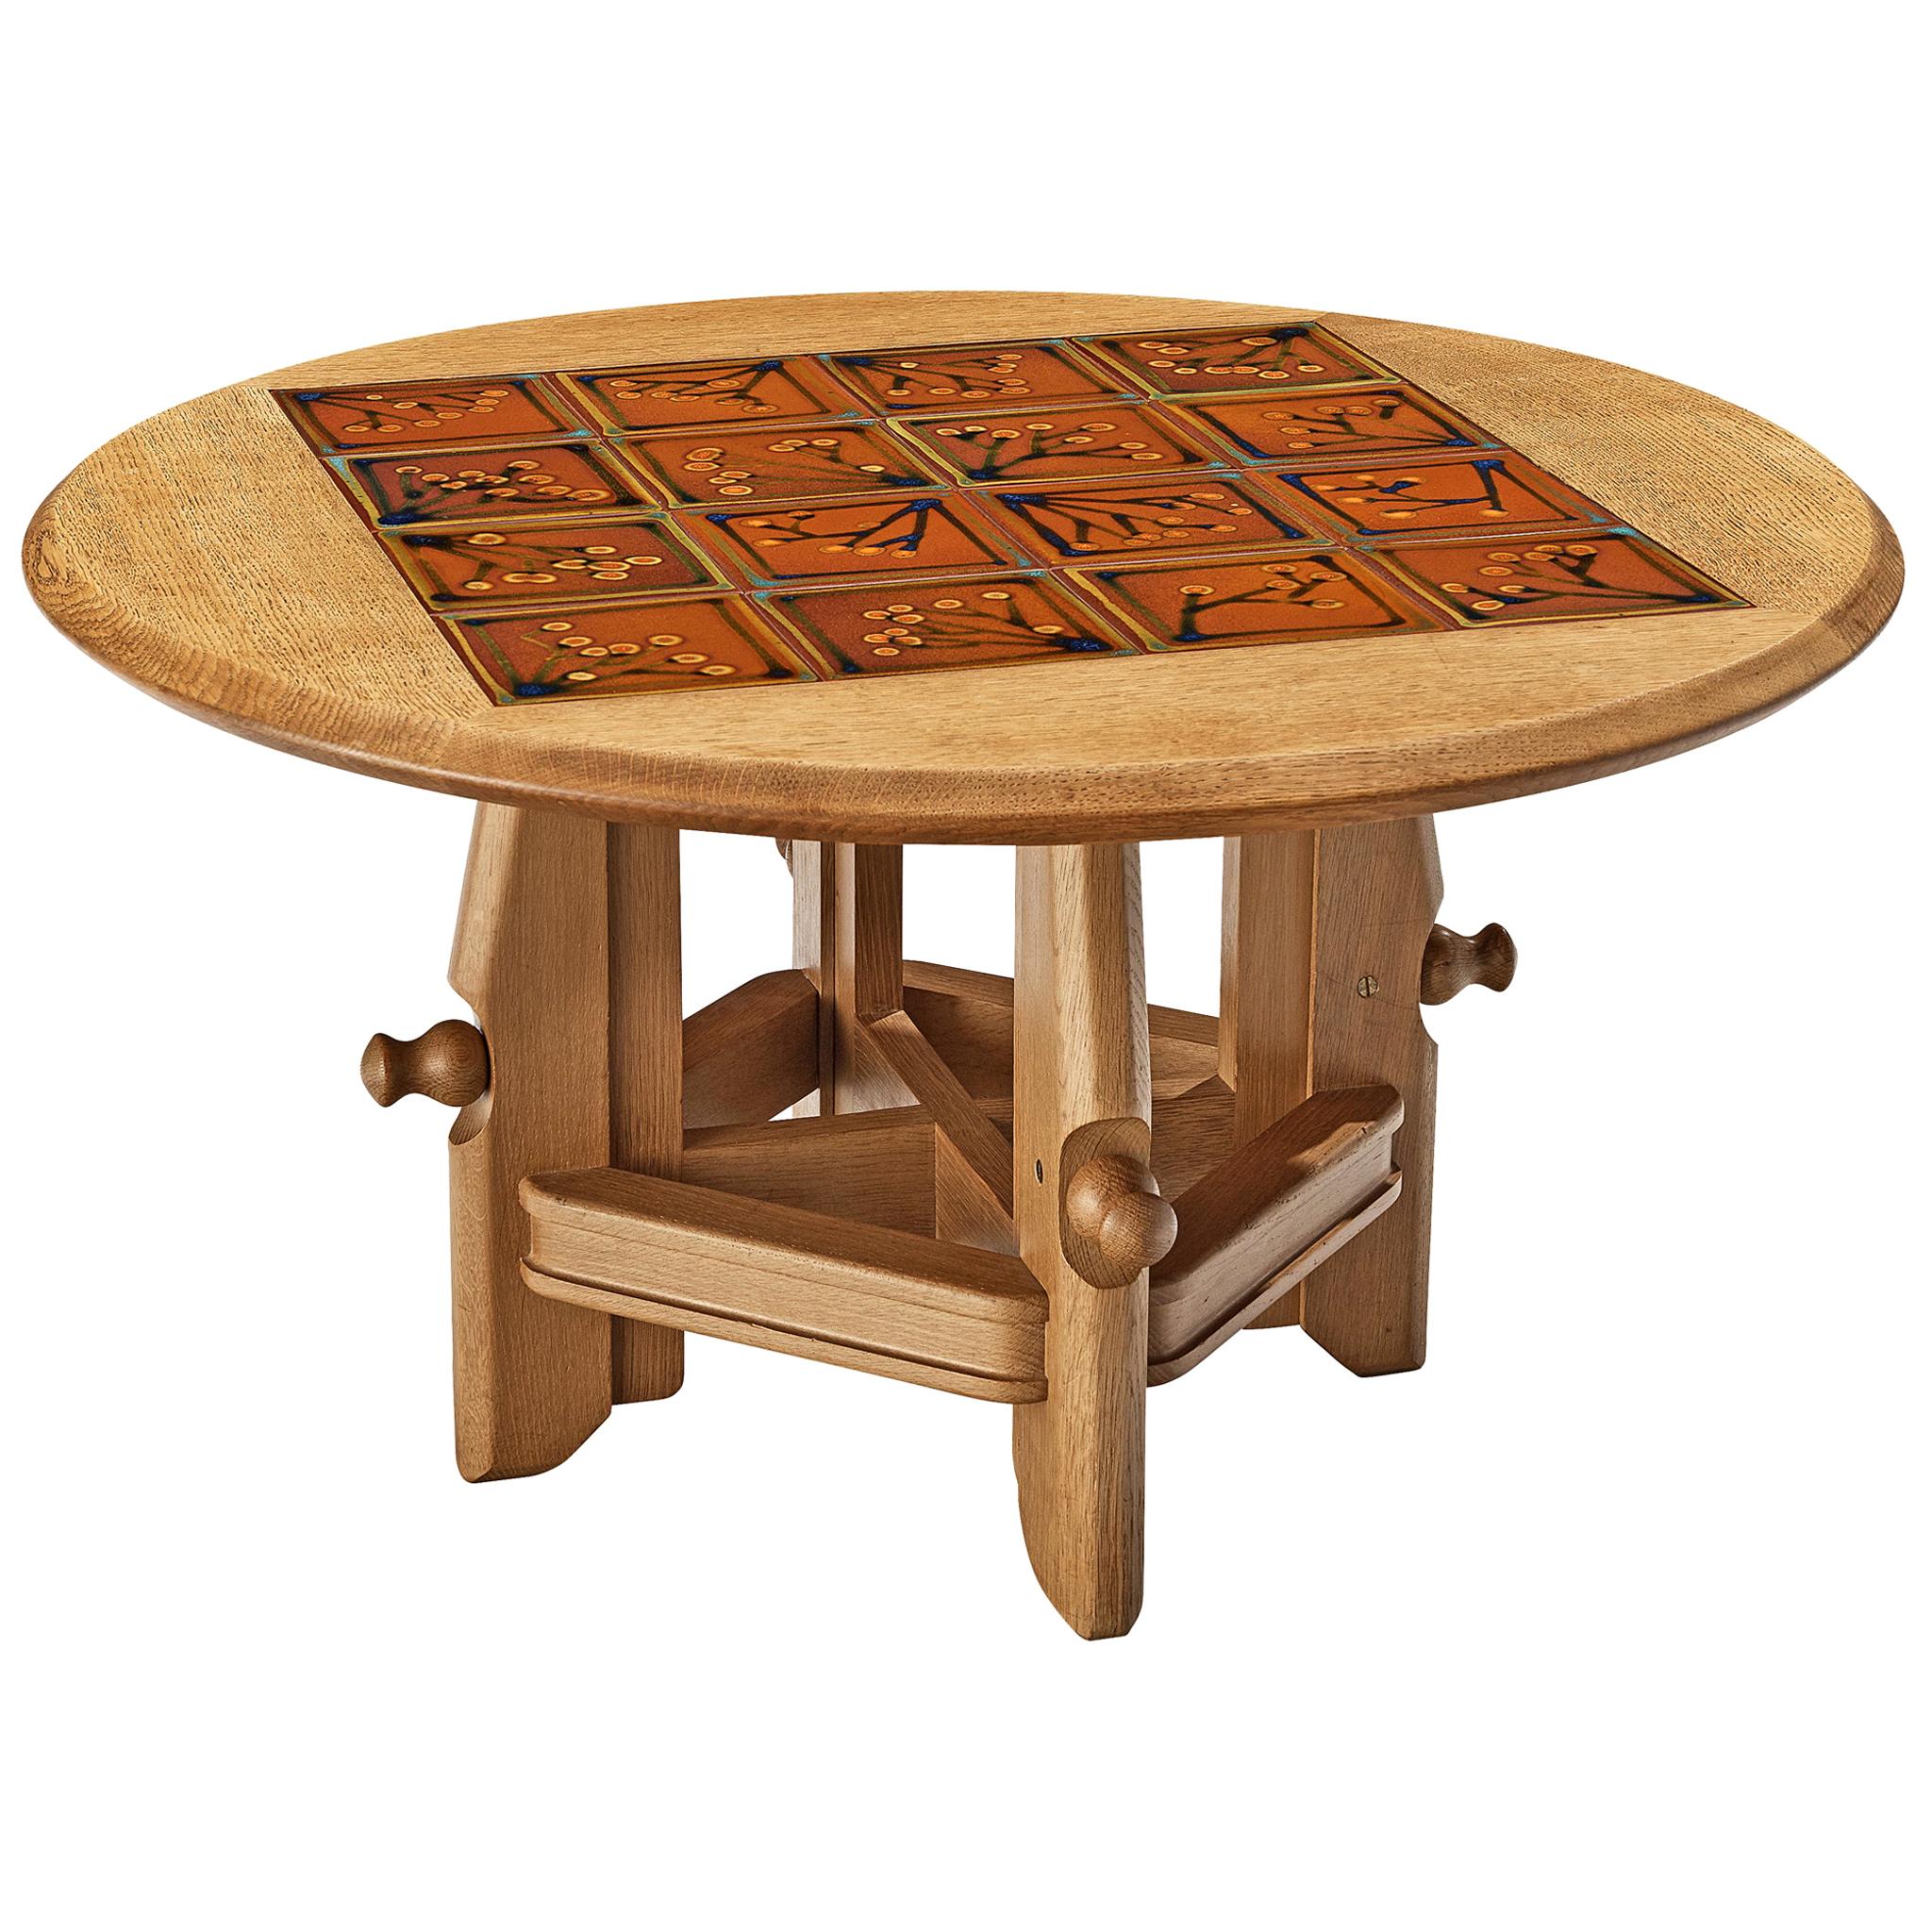 Guillerme et Chambron for Votre Maison, coffee table, oak, ceramic, France, 1960s

Adjustable coffee table with low and high position. The top is adorned with inlaid ceramic tiles in vibrant brown toned colours and floral motifs. The oak frame shows